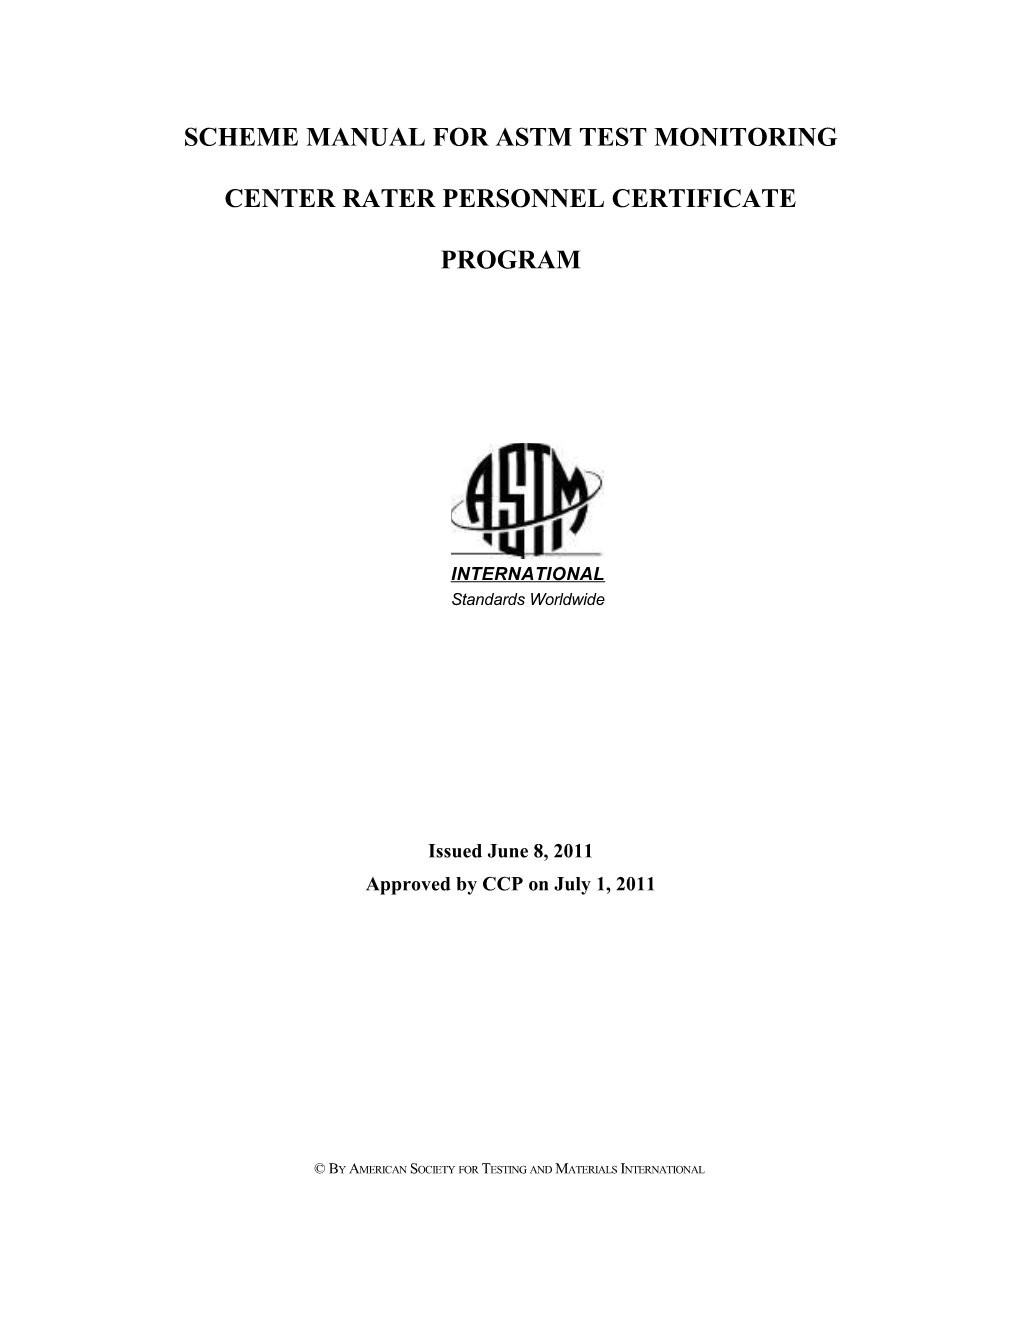 Operations Manual for Astm Test Monitoring Center Rater Personnel Certificate Program